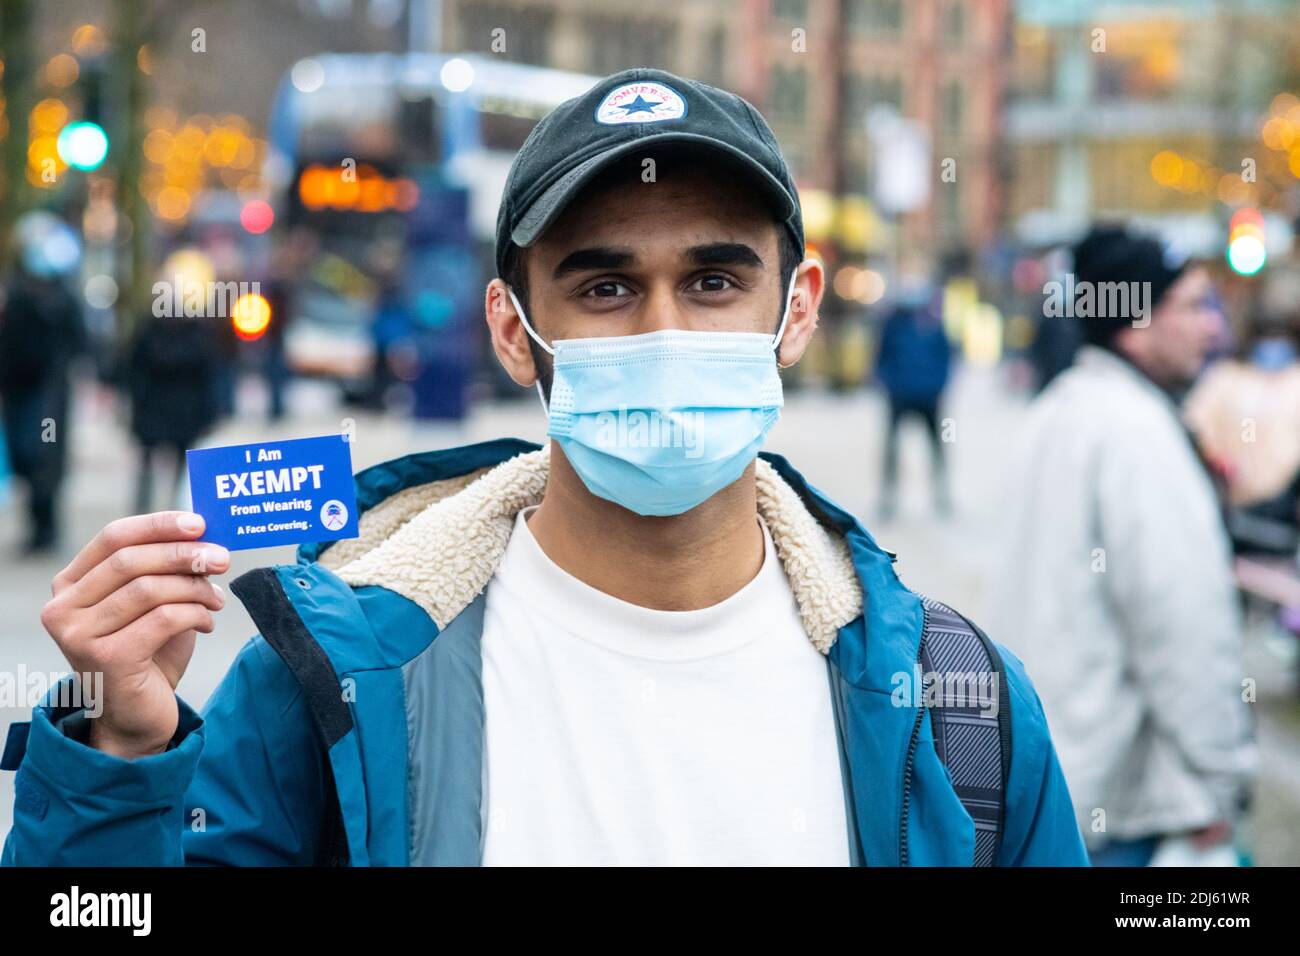 Manchester December 2020. A young man wearing his face mask while on the streets, holding up an exemption card handed to him by a protester Stock Photo